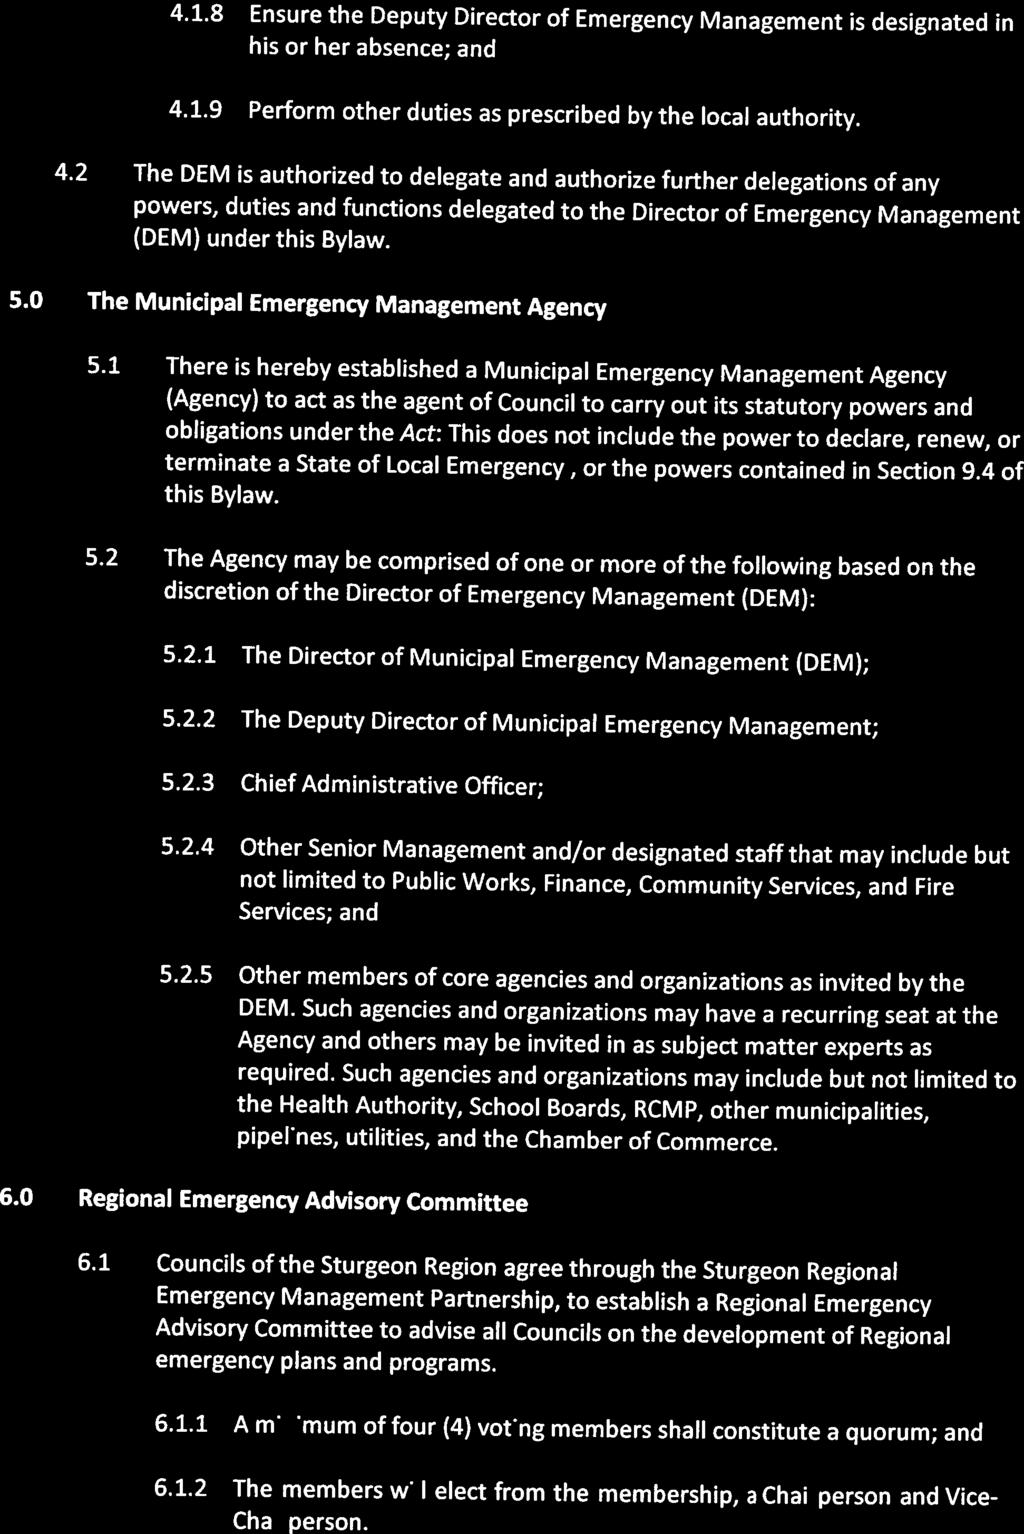 TWN F MRINVI LIE MRINVI LIE EMERGENCY MANAGEMENT BYLAW Page 4 4.1.8 Ensure the Deputy Director of Emergency Management is designated in his or her absence; and 4.1.9 Perform other duties as prescribed by the local authority.